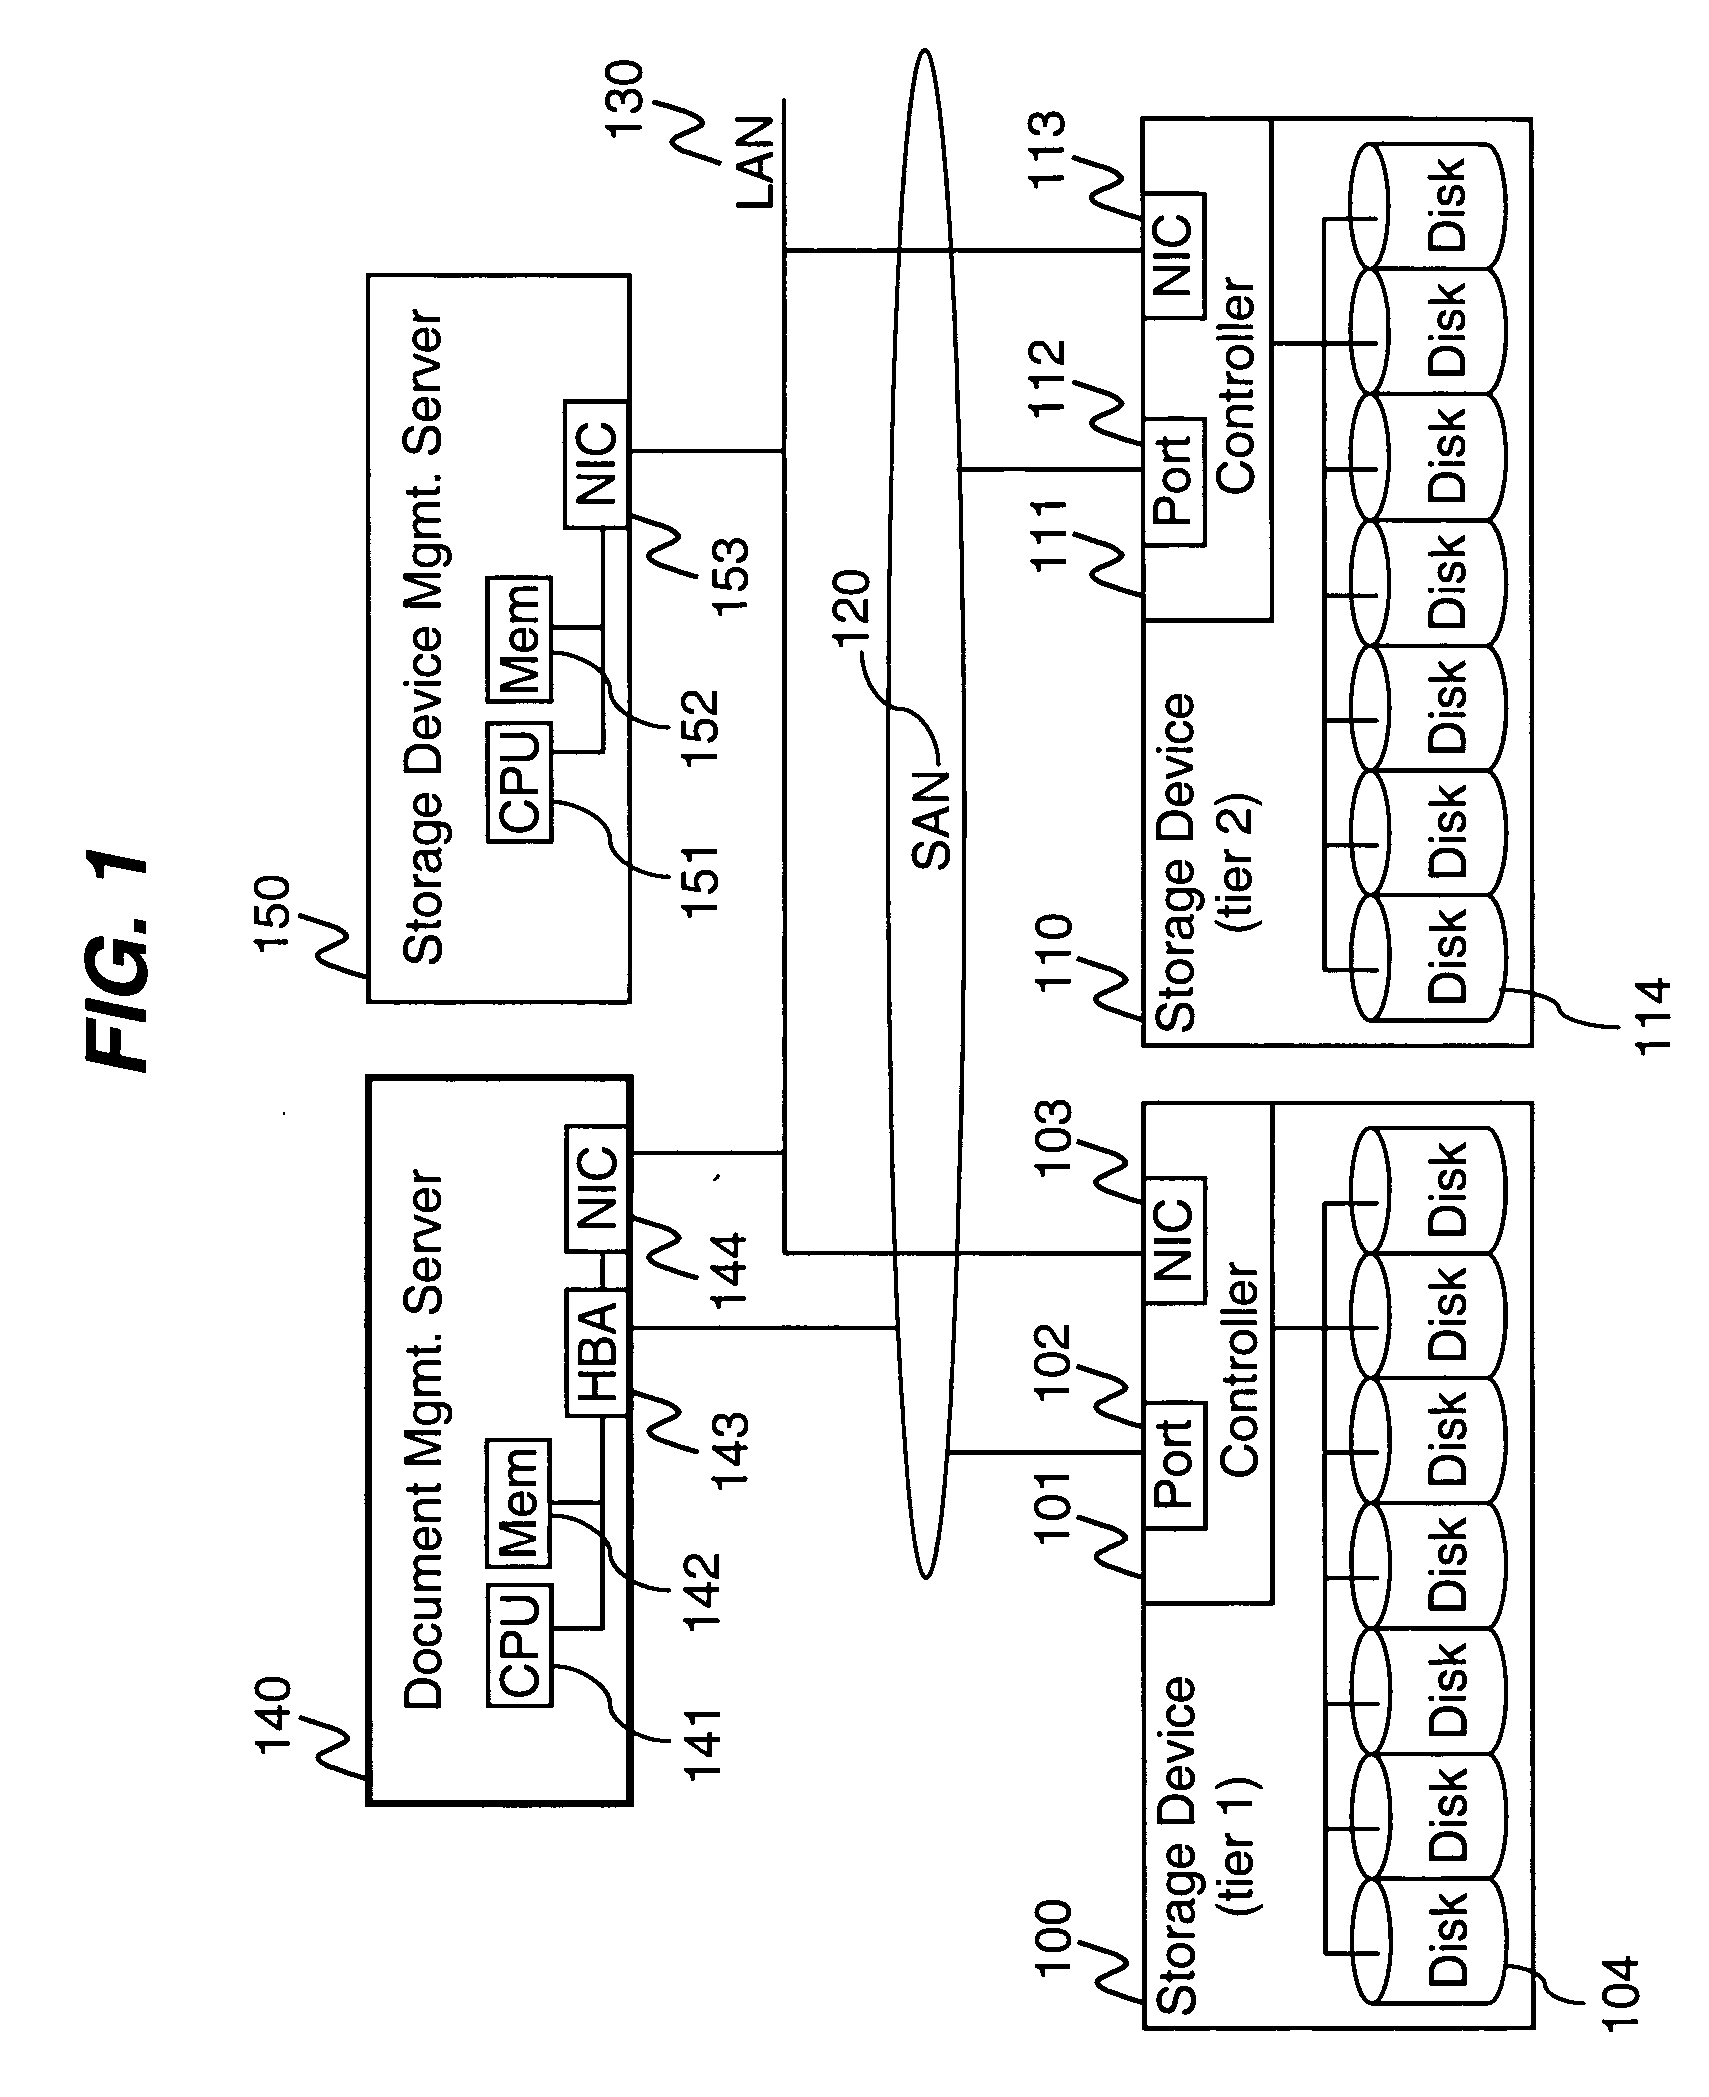 Computerized system and method for document management